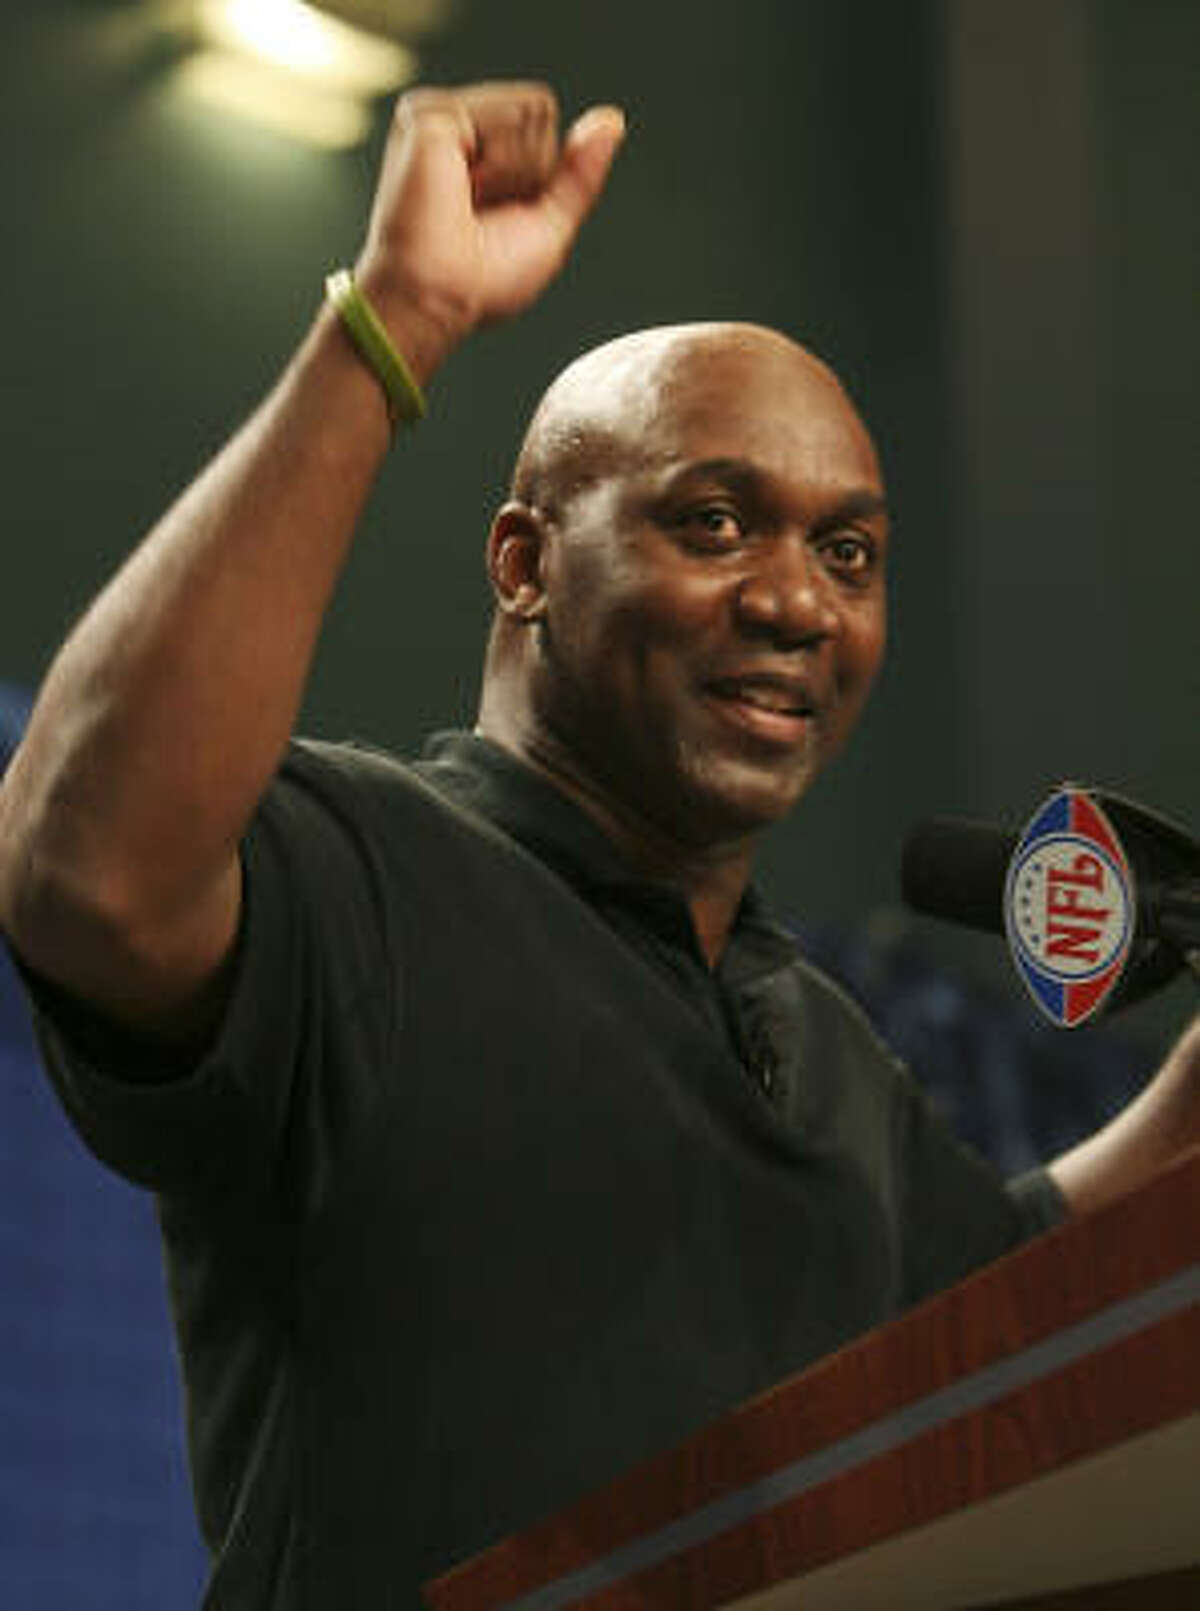 FAMOUS ALUMNI: Willowridge High School graduate Thurman Thomas is shown in 2007 making his acceptance speech during the Super Bowl XLI Pro Football Hall of Fame press conference.